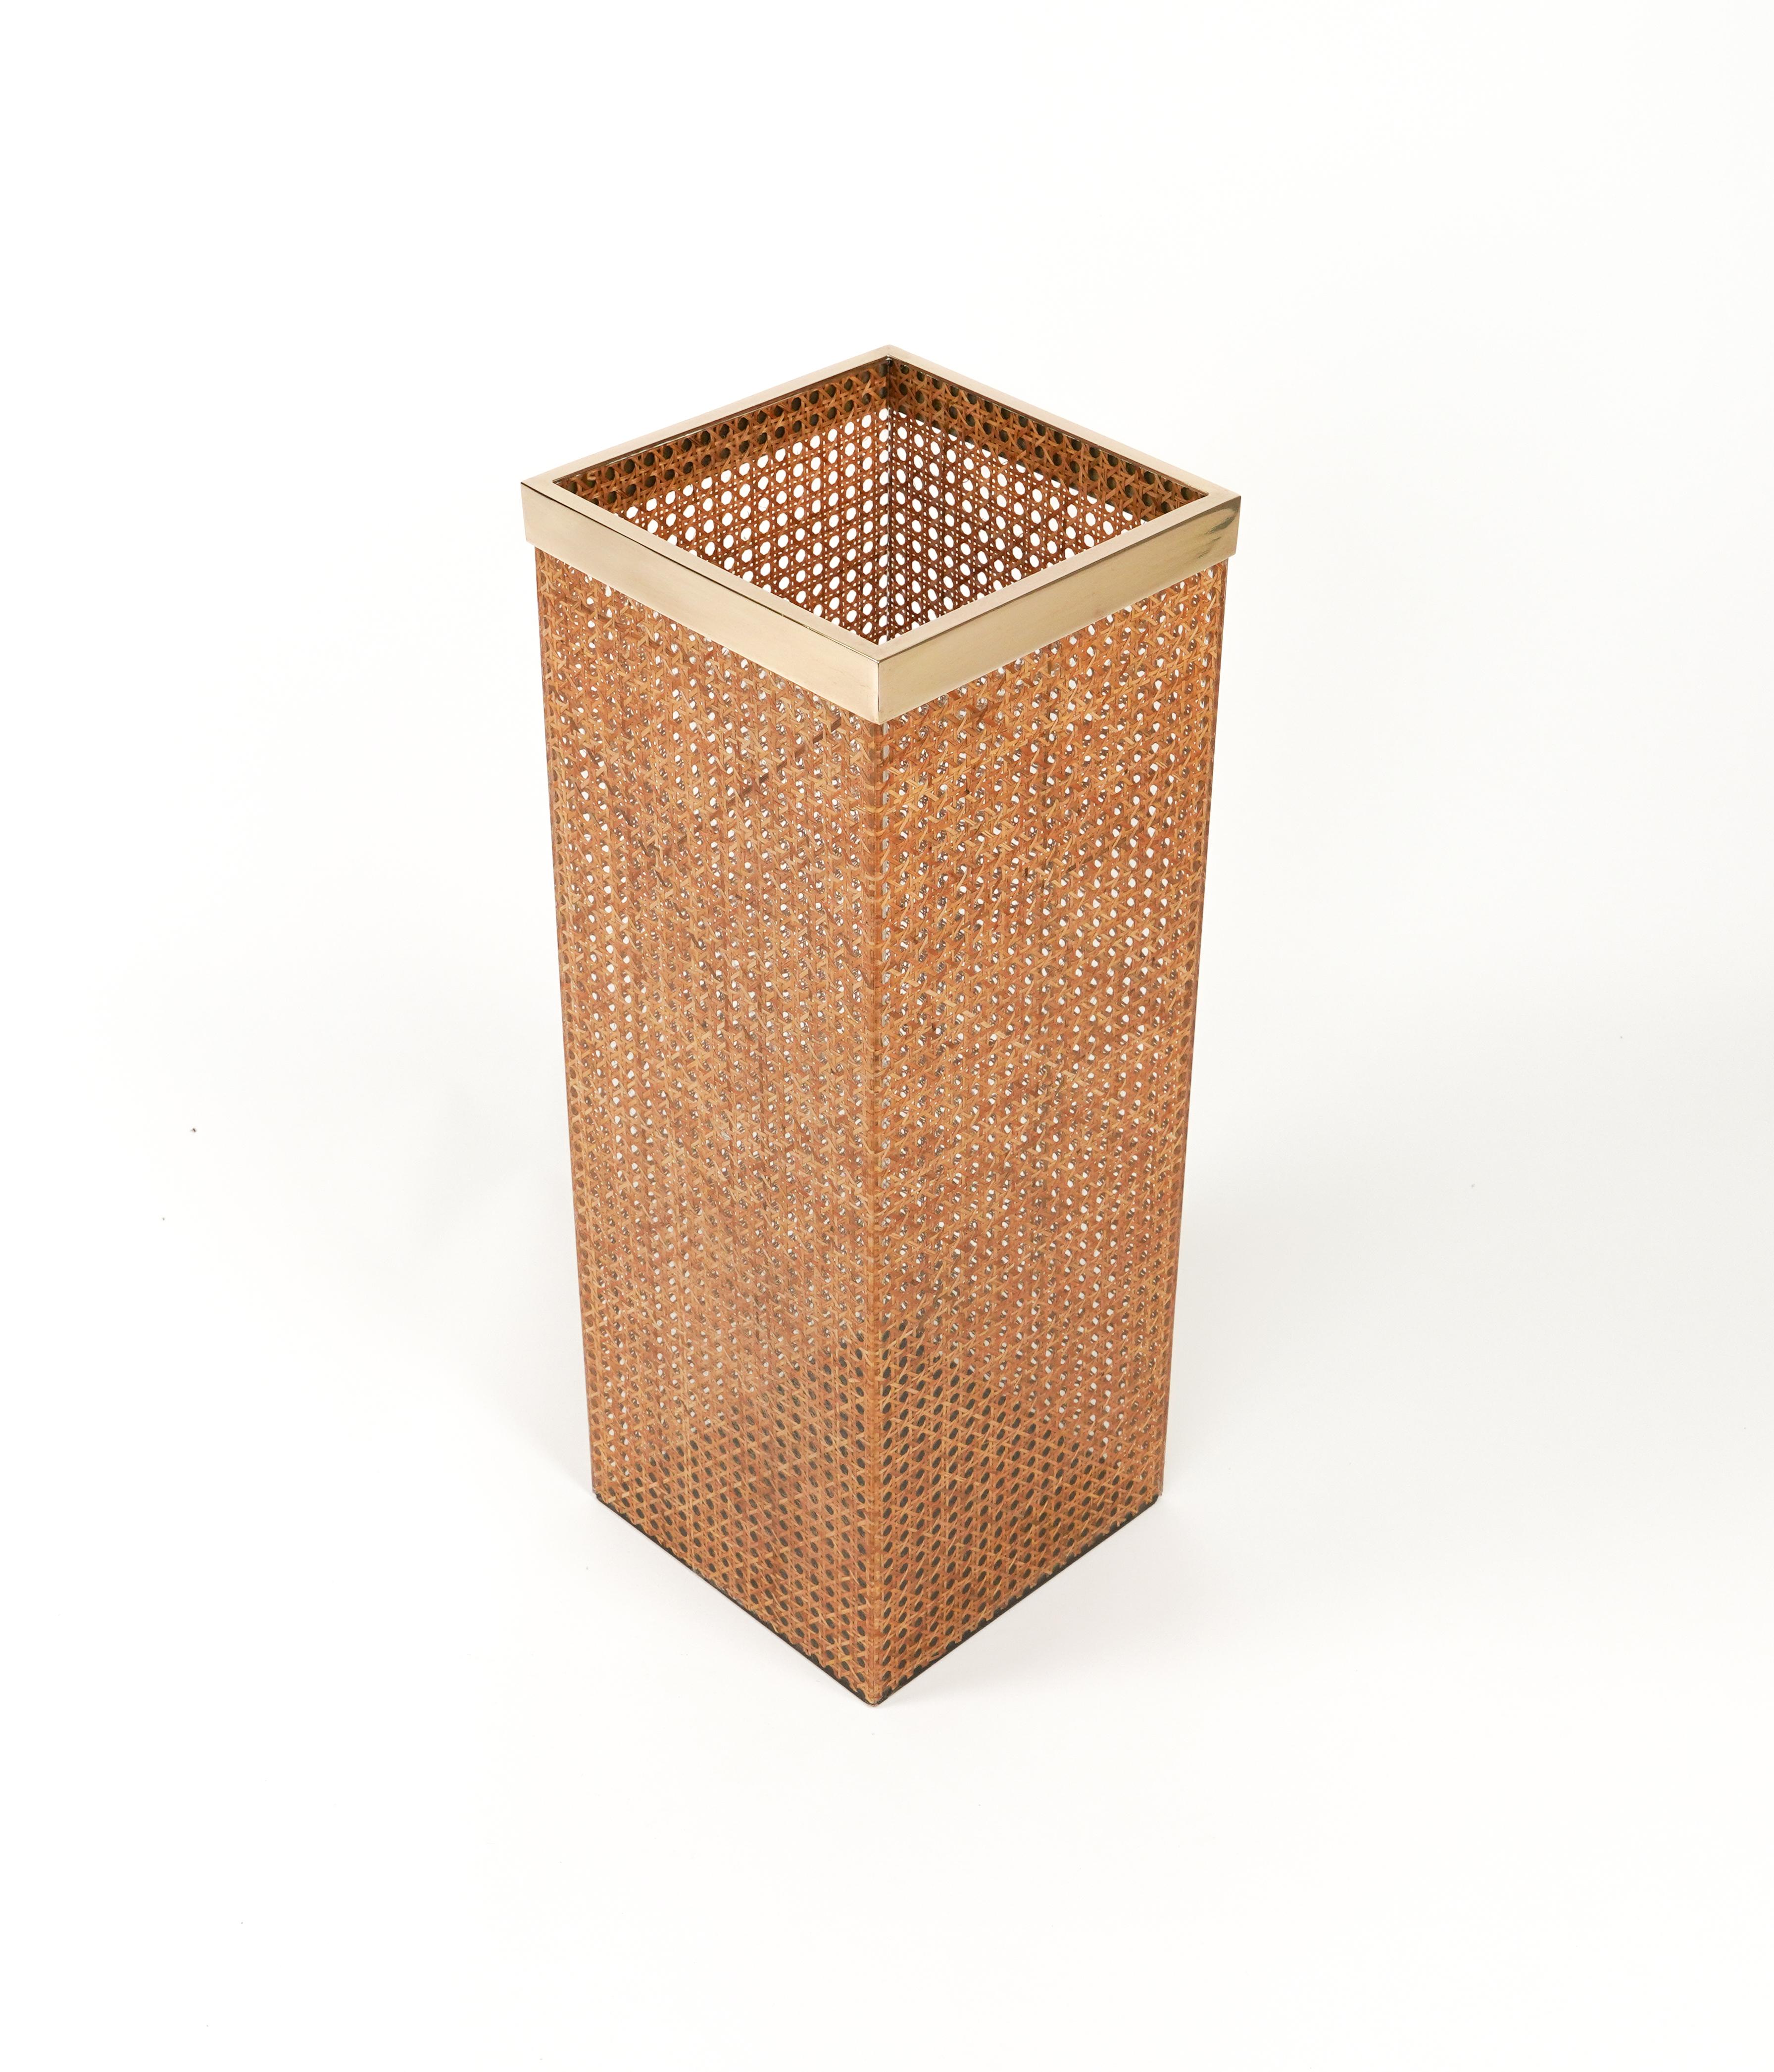 Midcentury amazing umbrella stand in Lucite rattan and brass details in the style of Christian Dior Home. 

Made in Italy in the 1970s.